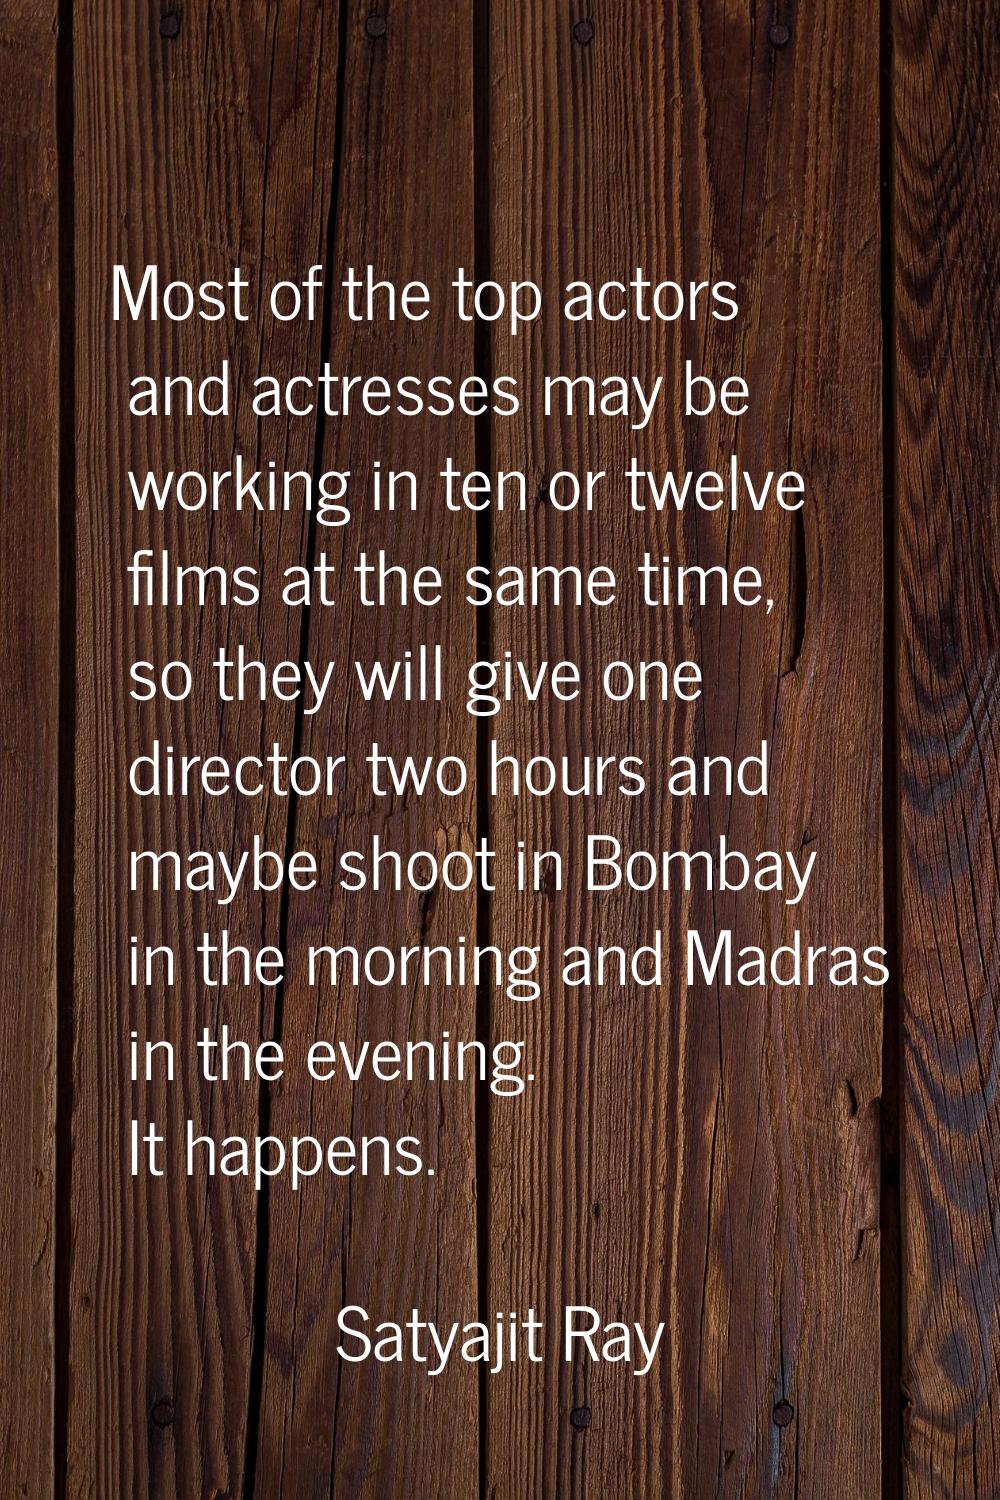 Most of the top actors and actresses may be working in ten or twelve films at the same time, so the